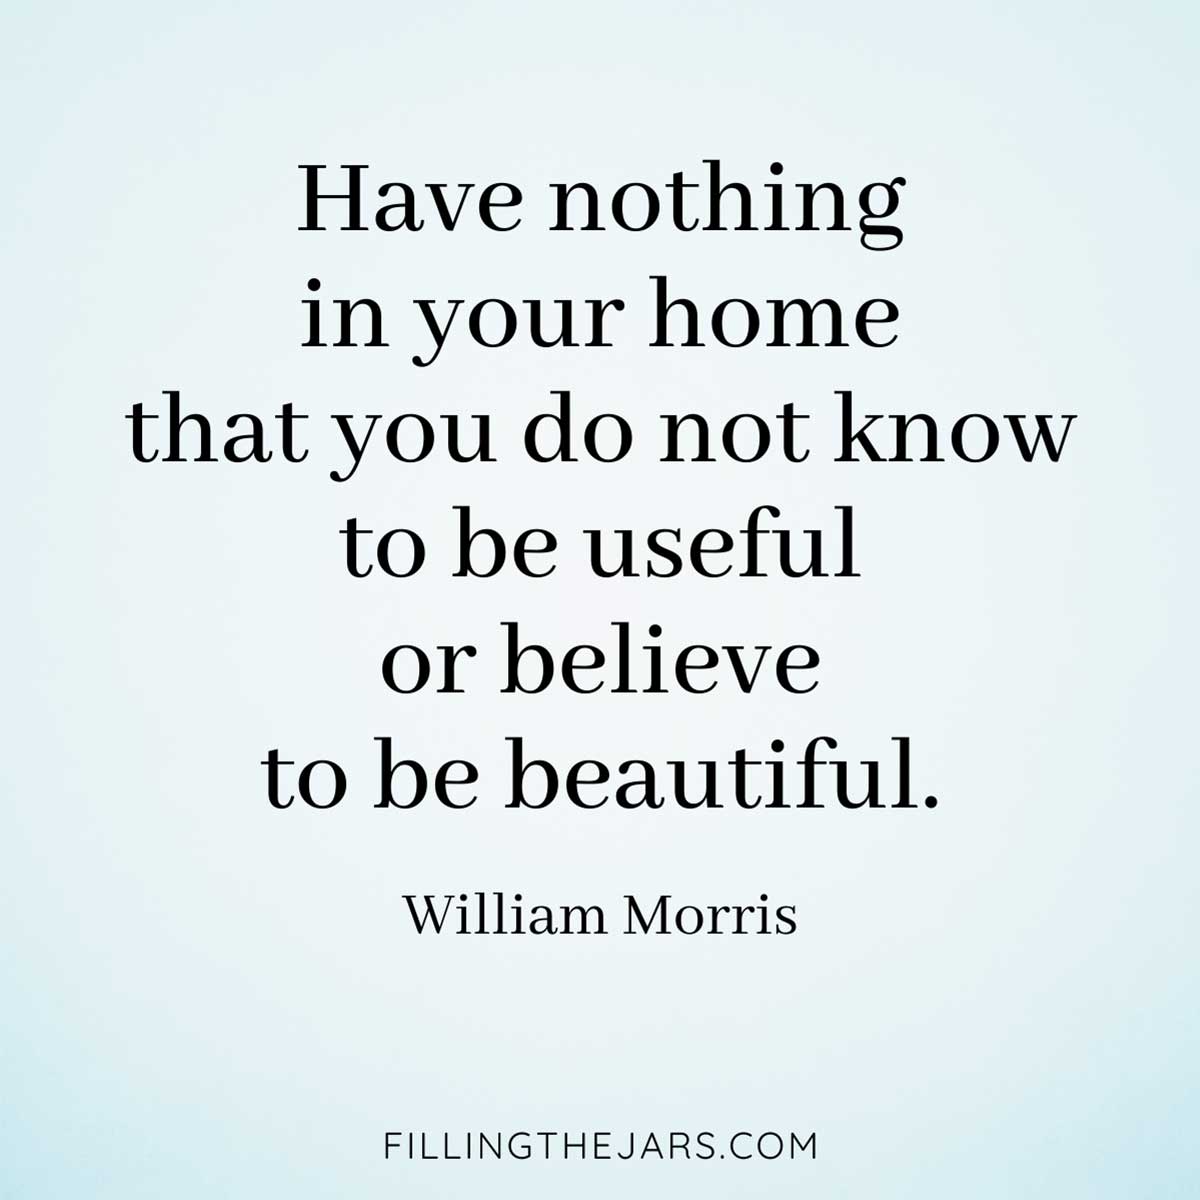 William Morris quote to inspire decluttering a small home.